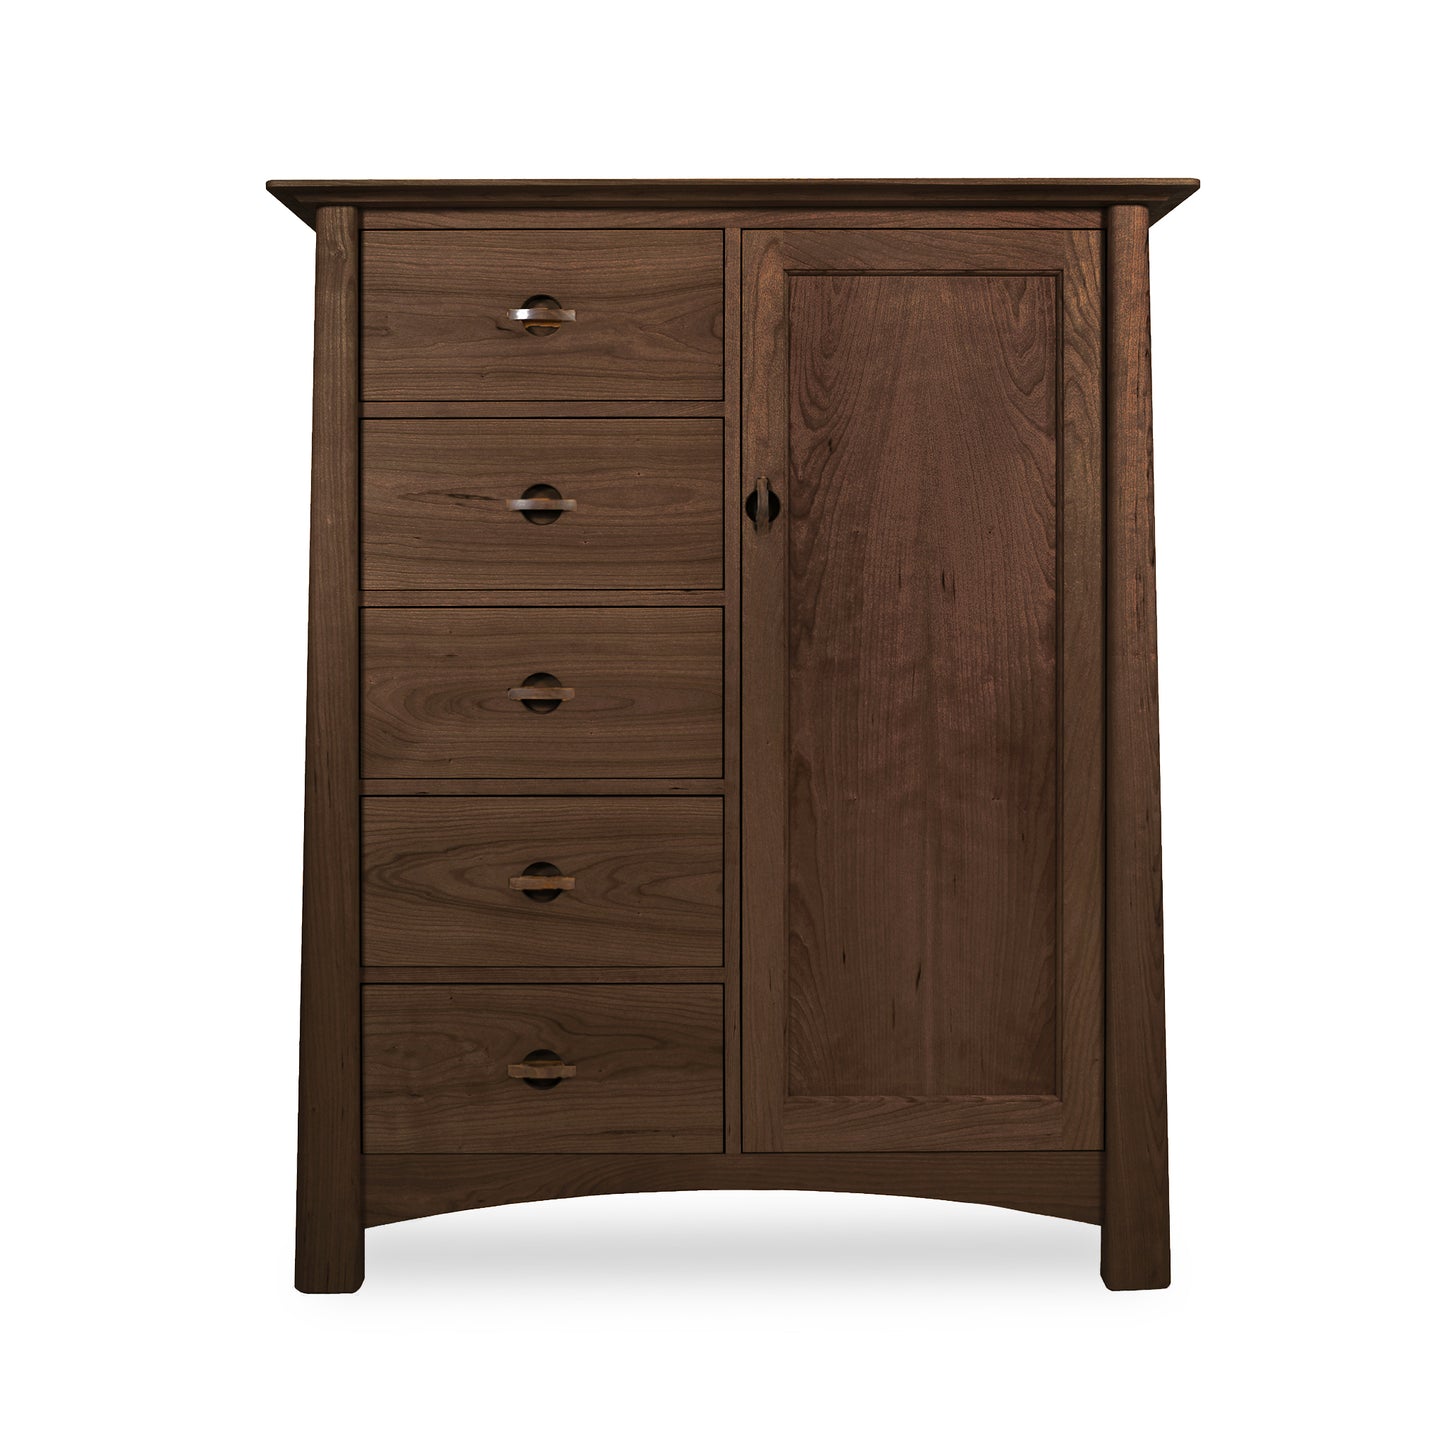 A Cherry Moon Sweater Chest with one door and four drawers against a white background, made from sustainably harvested solid woods with an eco-friendly oil finish by Maple Corner Woodworks.